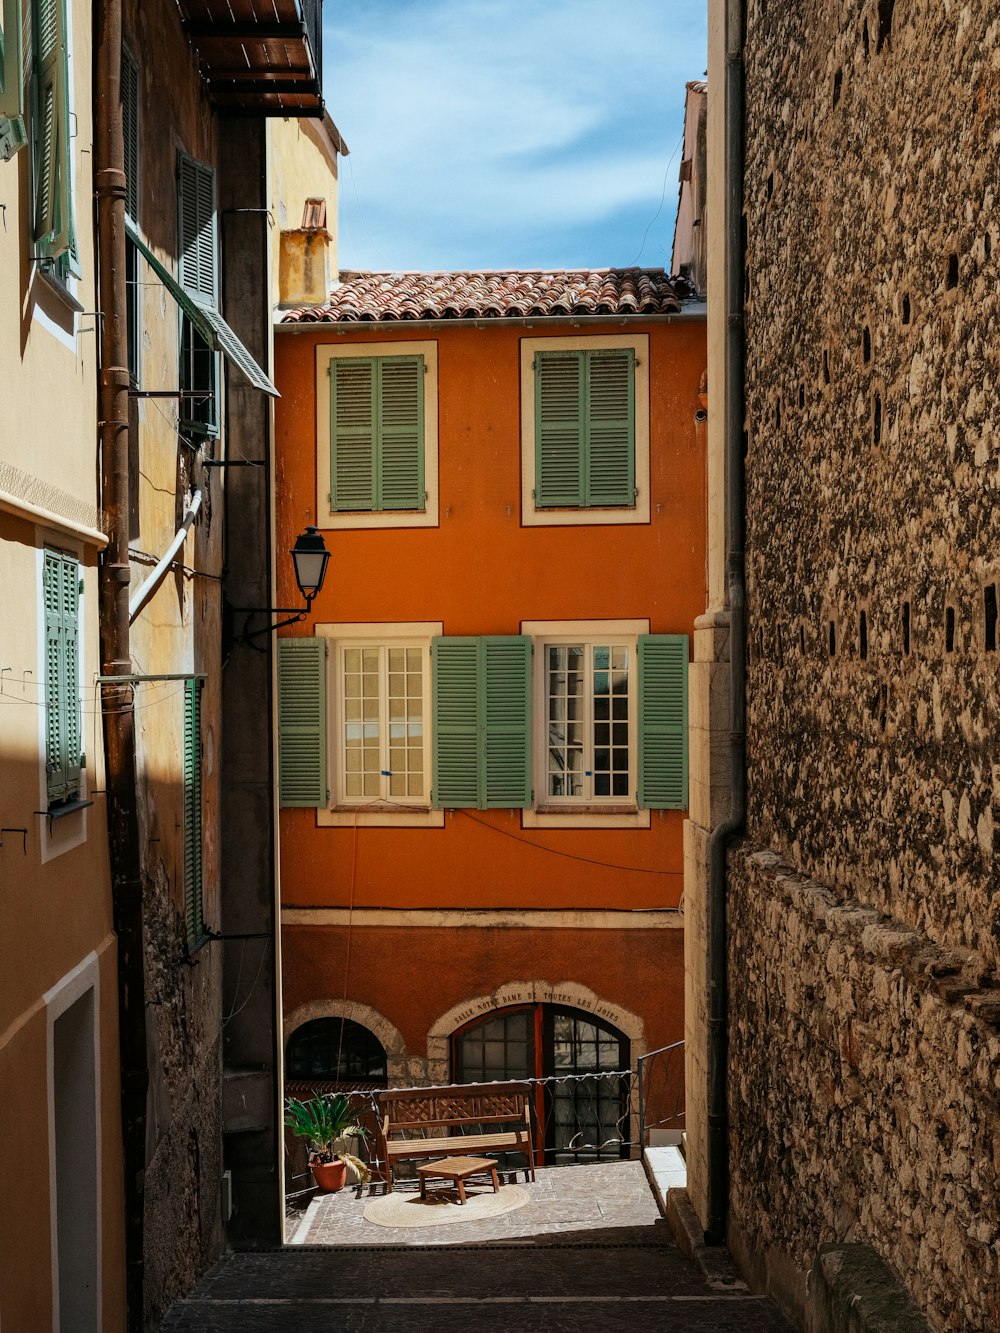 a narrow alley way with a bench between two buildings